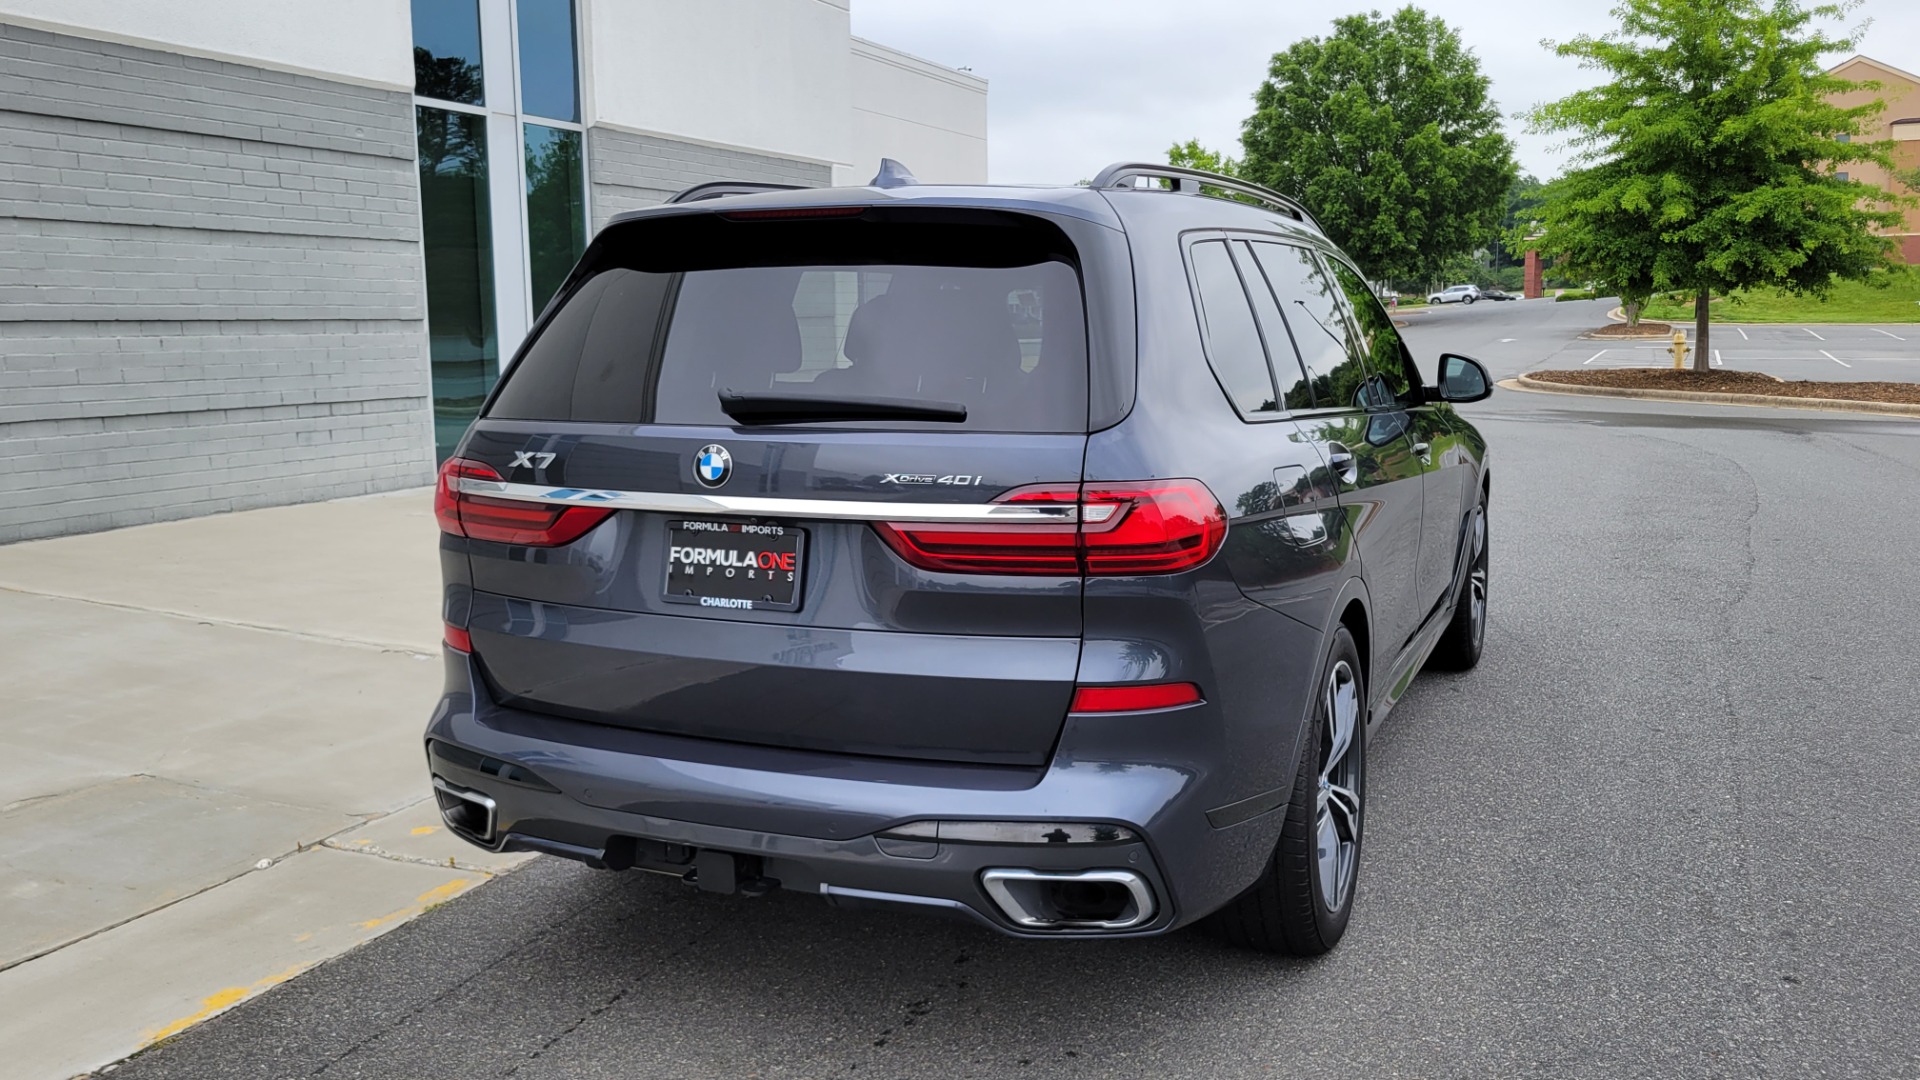 Used 2019 BMW X7 XDRIVE40I M-SPORT / PREMIUM / CLD THR / PARK ASST / DRVR ASST / SKY LOUNGE  for sale $64,395 at Formula Imports in Charlotte NC 28227 8